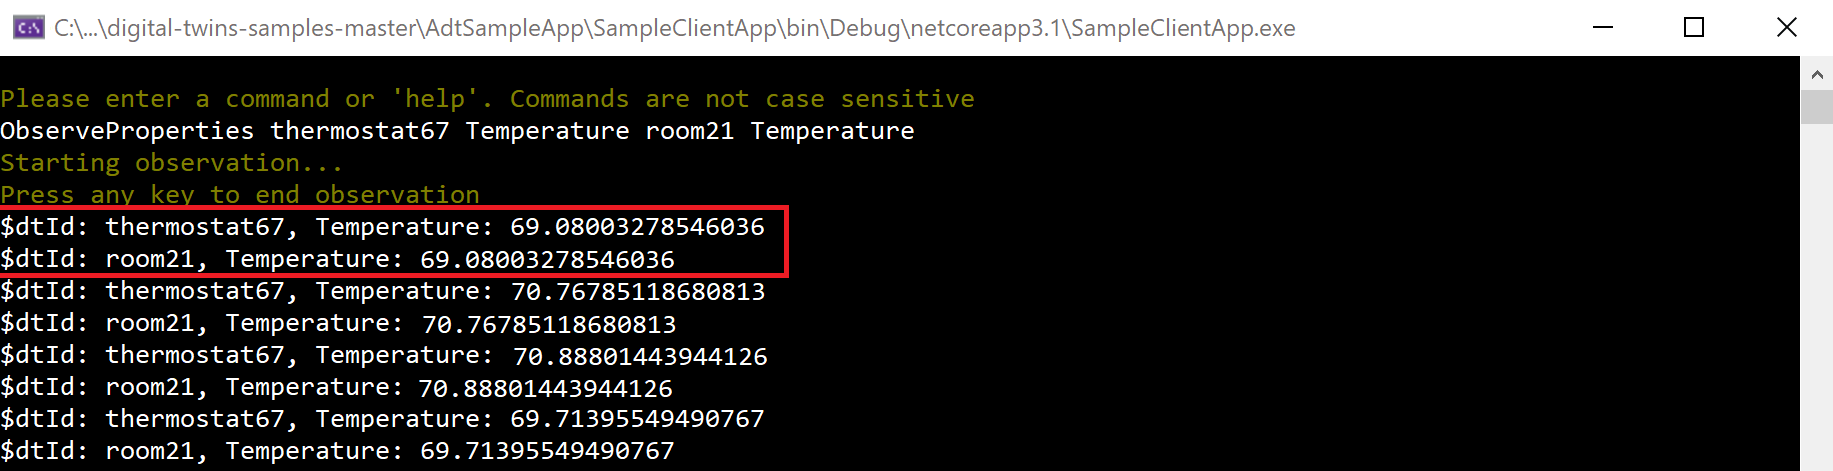 Screenshot of the console output showing a log of temperature messages, from a thermostat and a room.